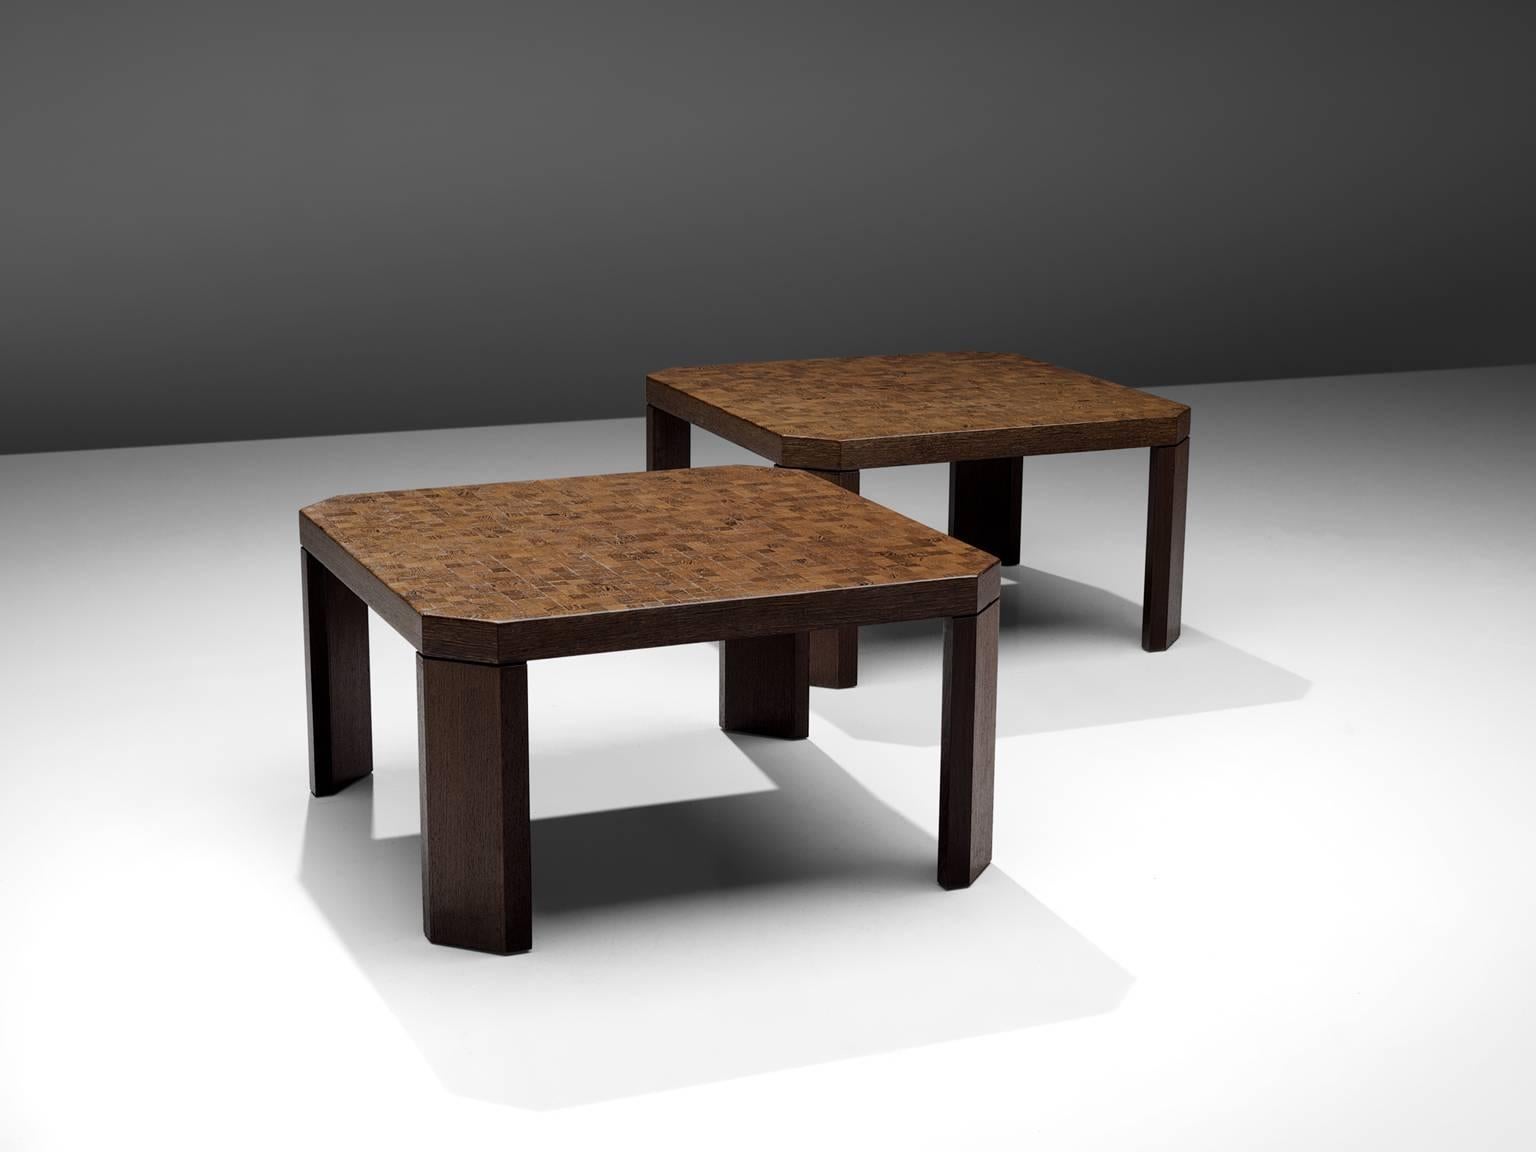 Side tables, wenge, Europe, 1970s.

This architectural set of coffee tables has four angled legs that are placed inwards. The corners of the tables are therefore not sharp as with a clean square but are flattened. The top of the table is made out